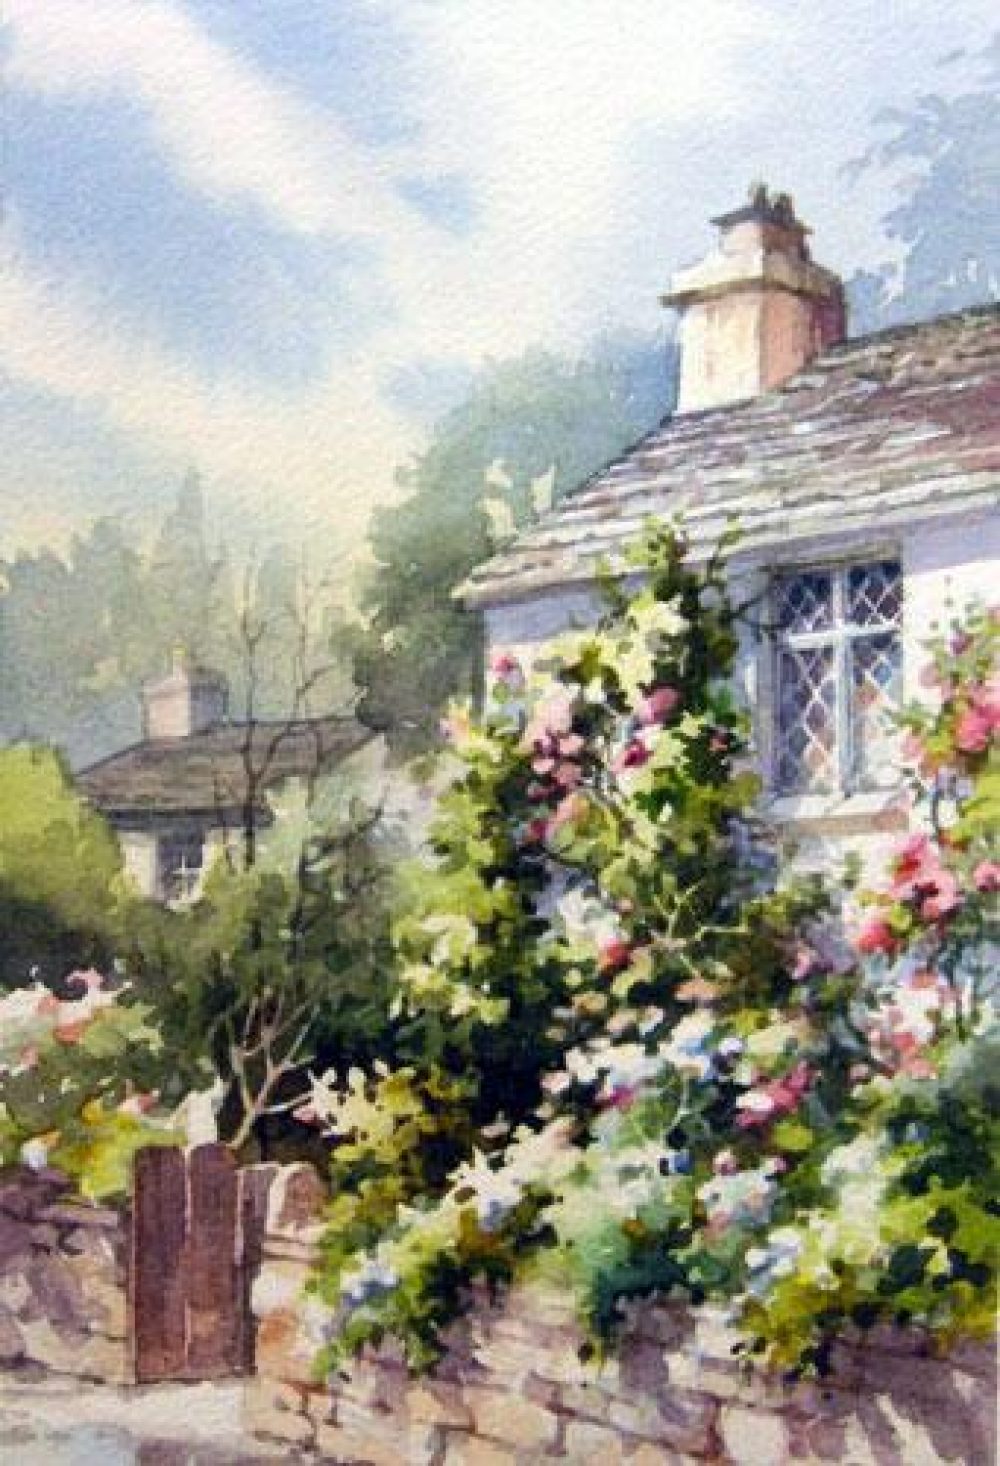 Grasmere England - Dove Cottage - Watercolor painting of the Dove Cottage in Grasmere